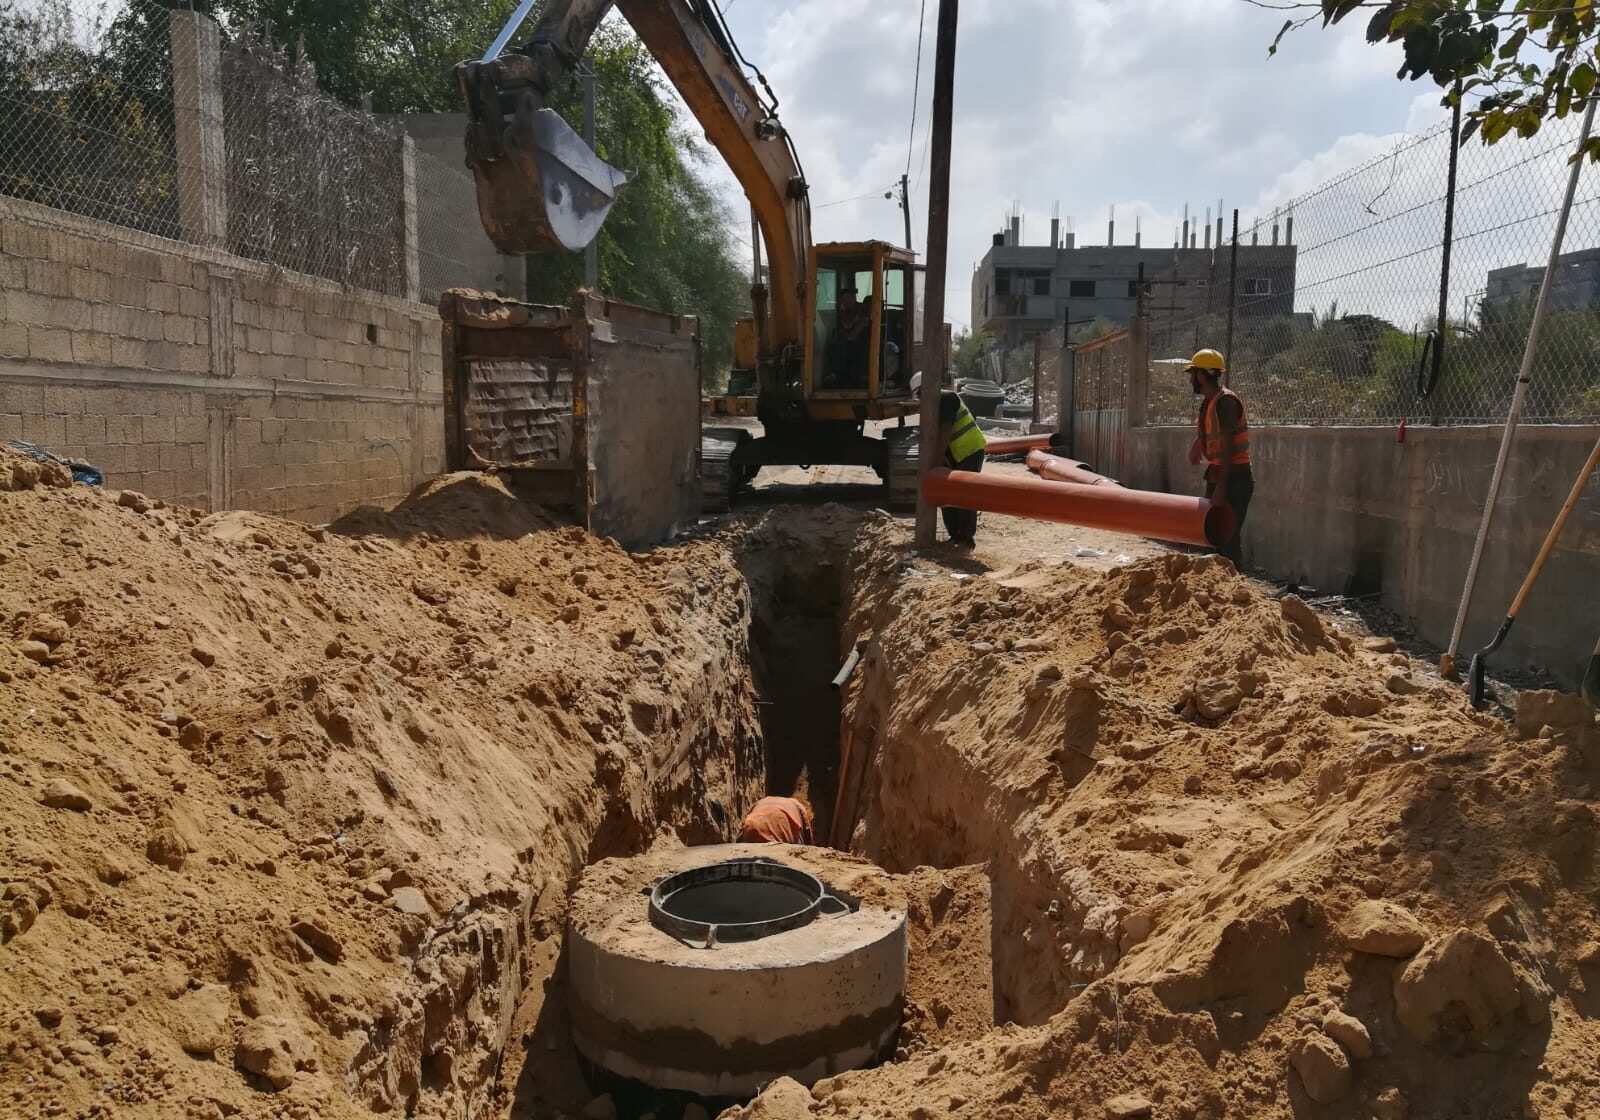 Sewage pipes being fitted into place.